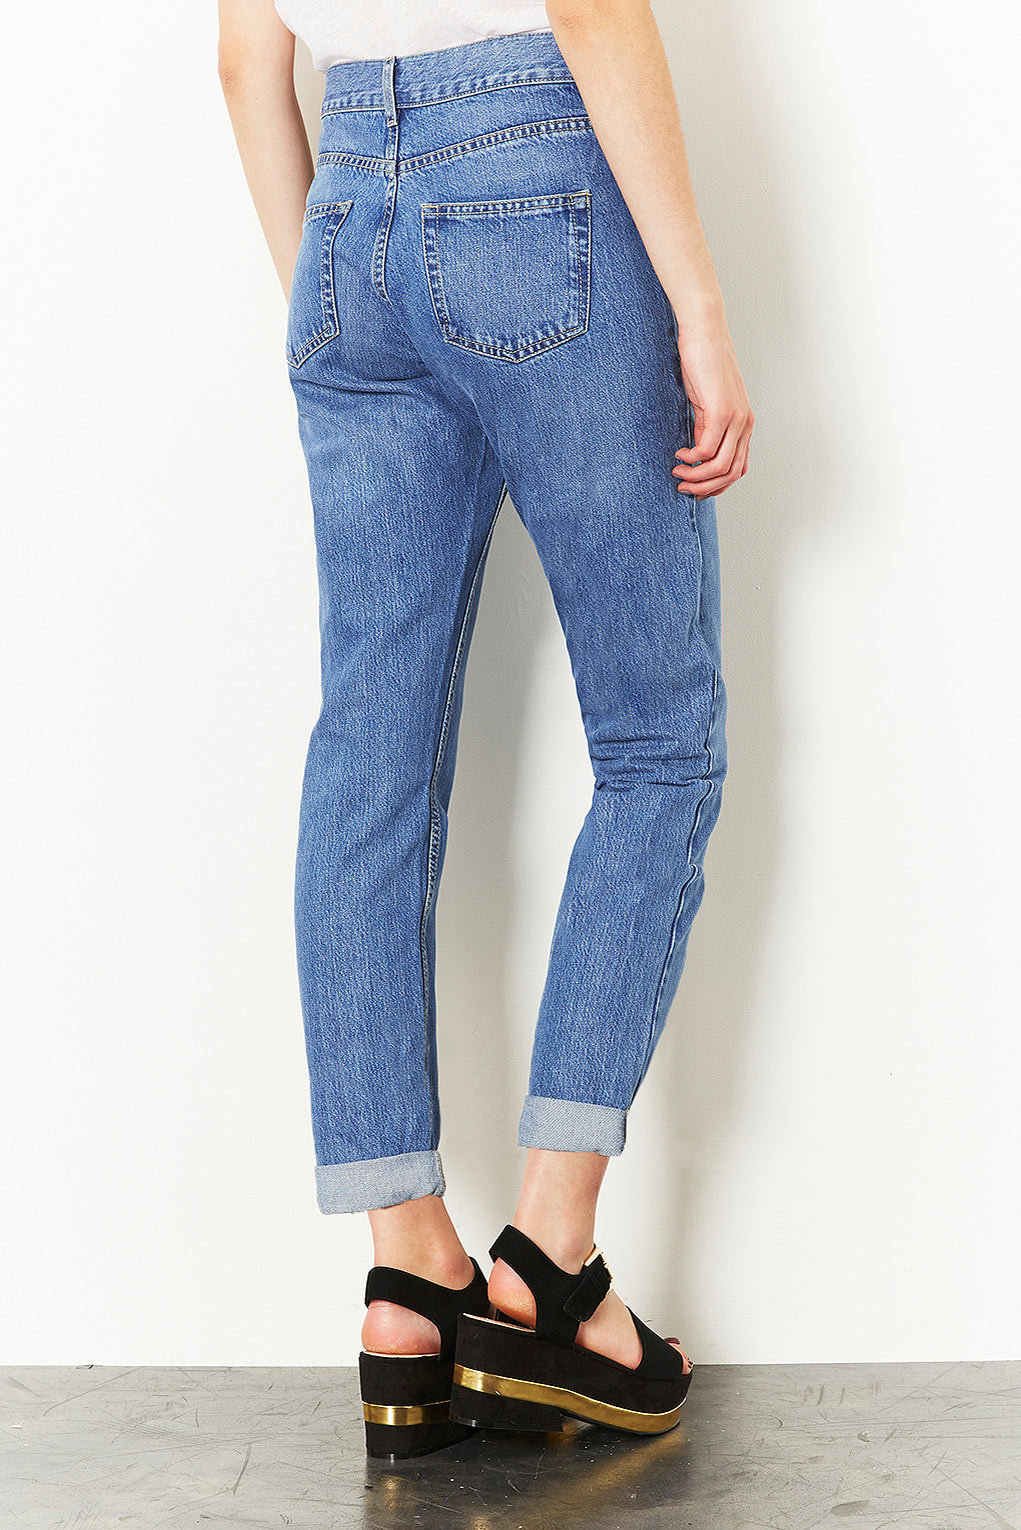 Lyst Petite Moto Soft Vintage Mom Jeans in Blue